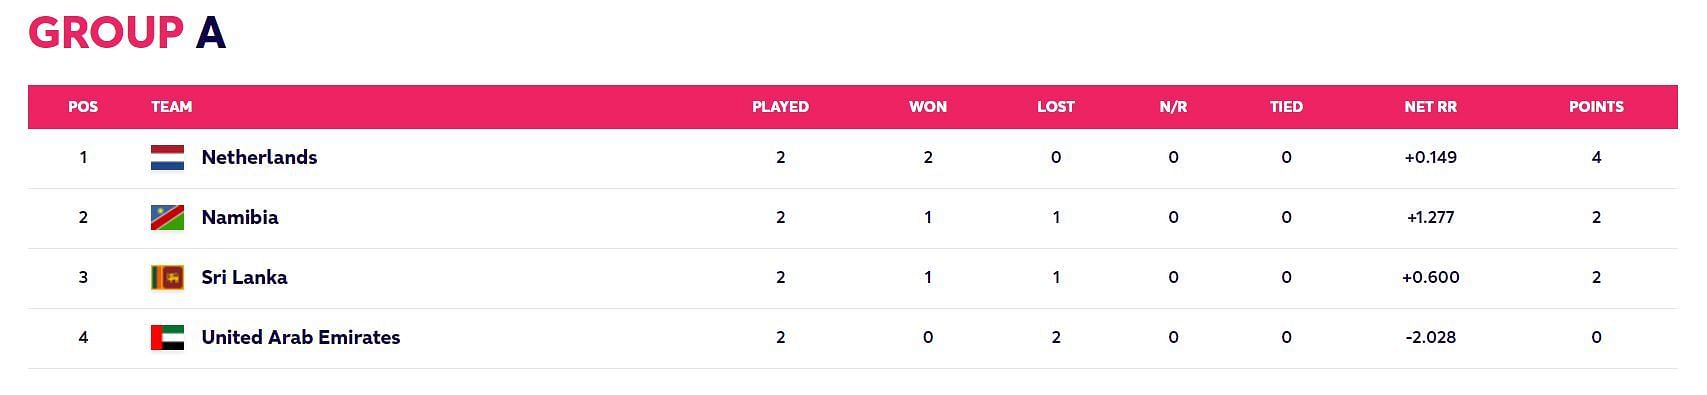 Updated Points Table after Match 6 (Image Courtesy: www.t20worldcup.com)